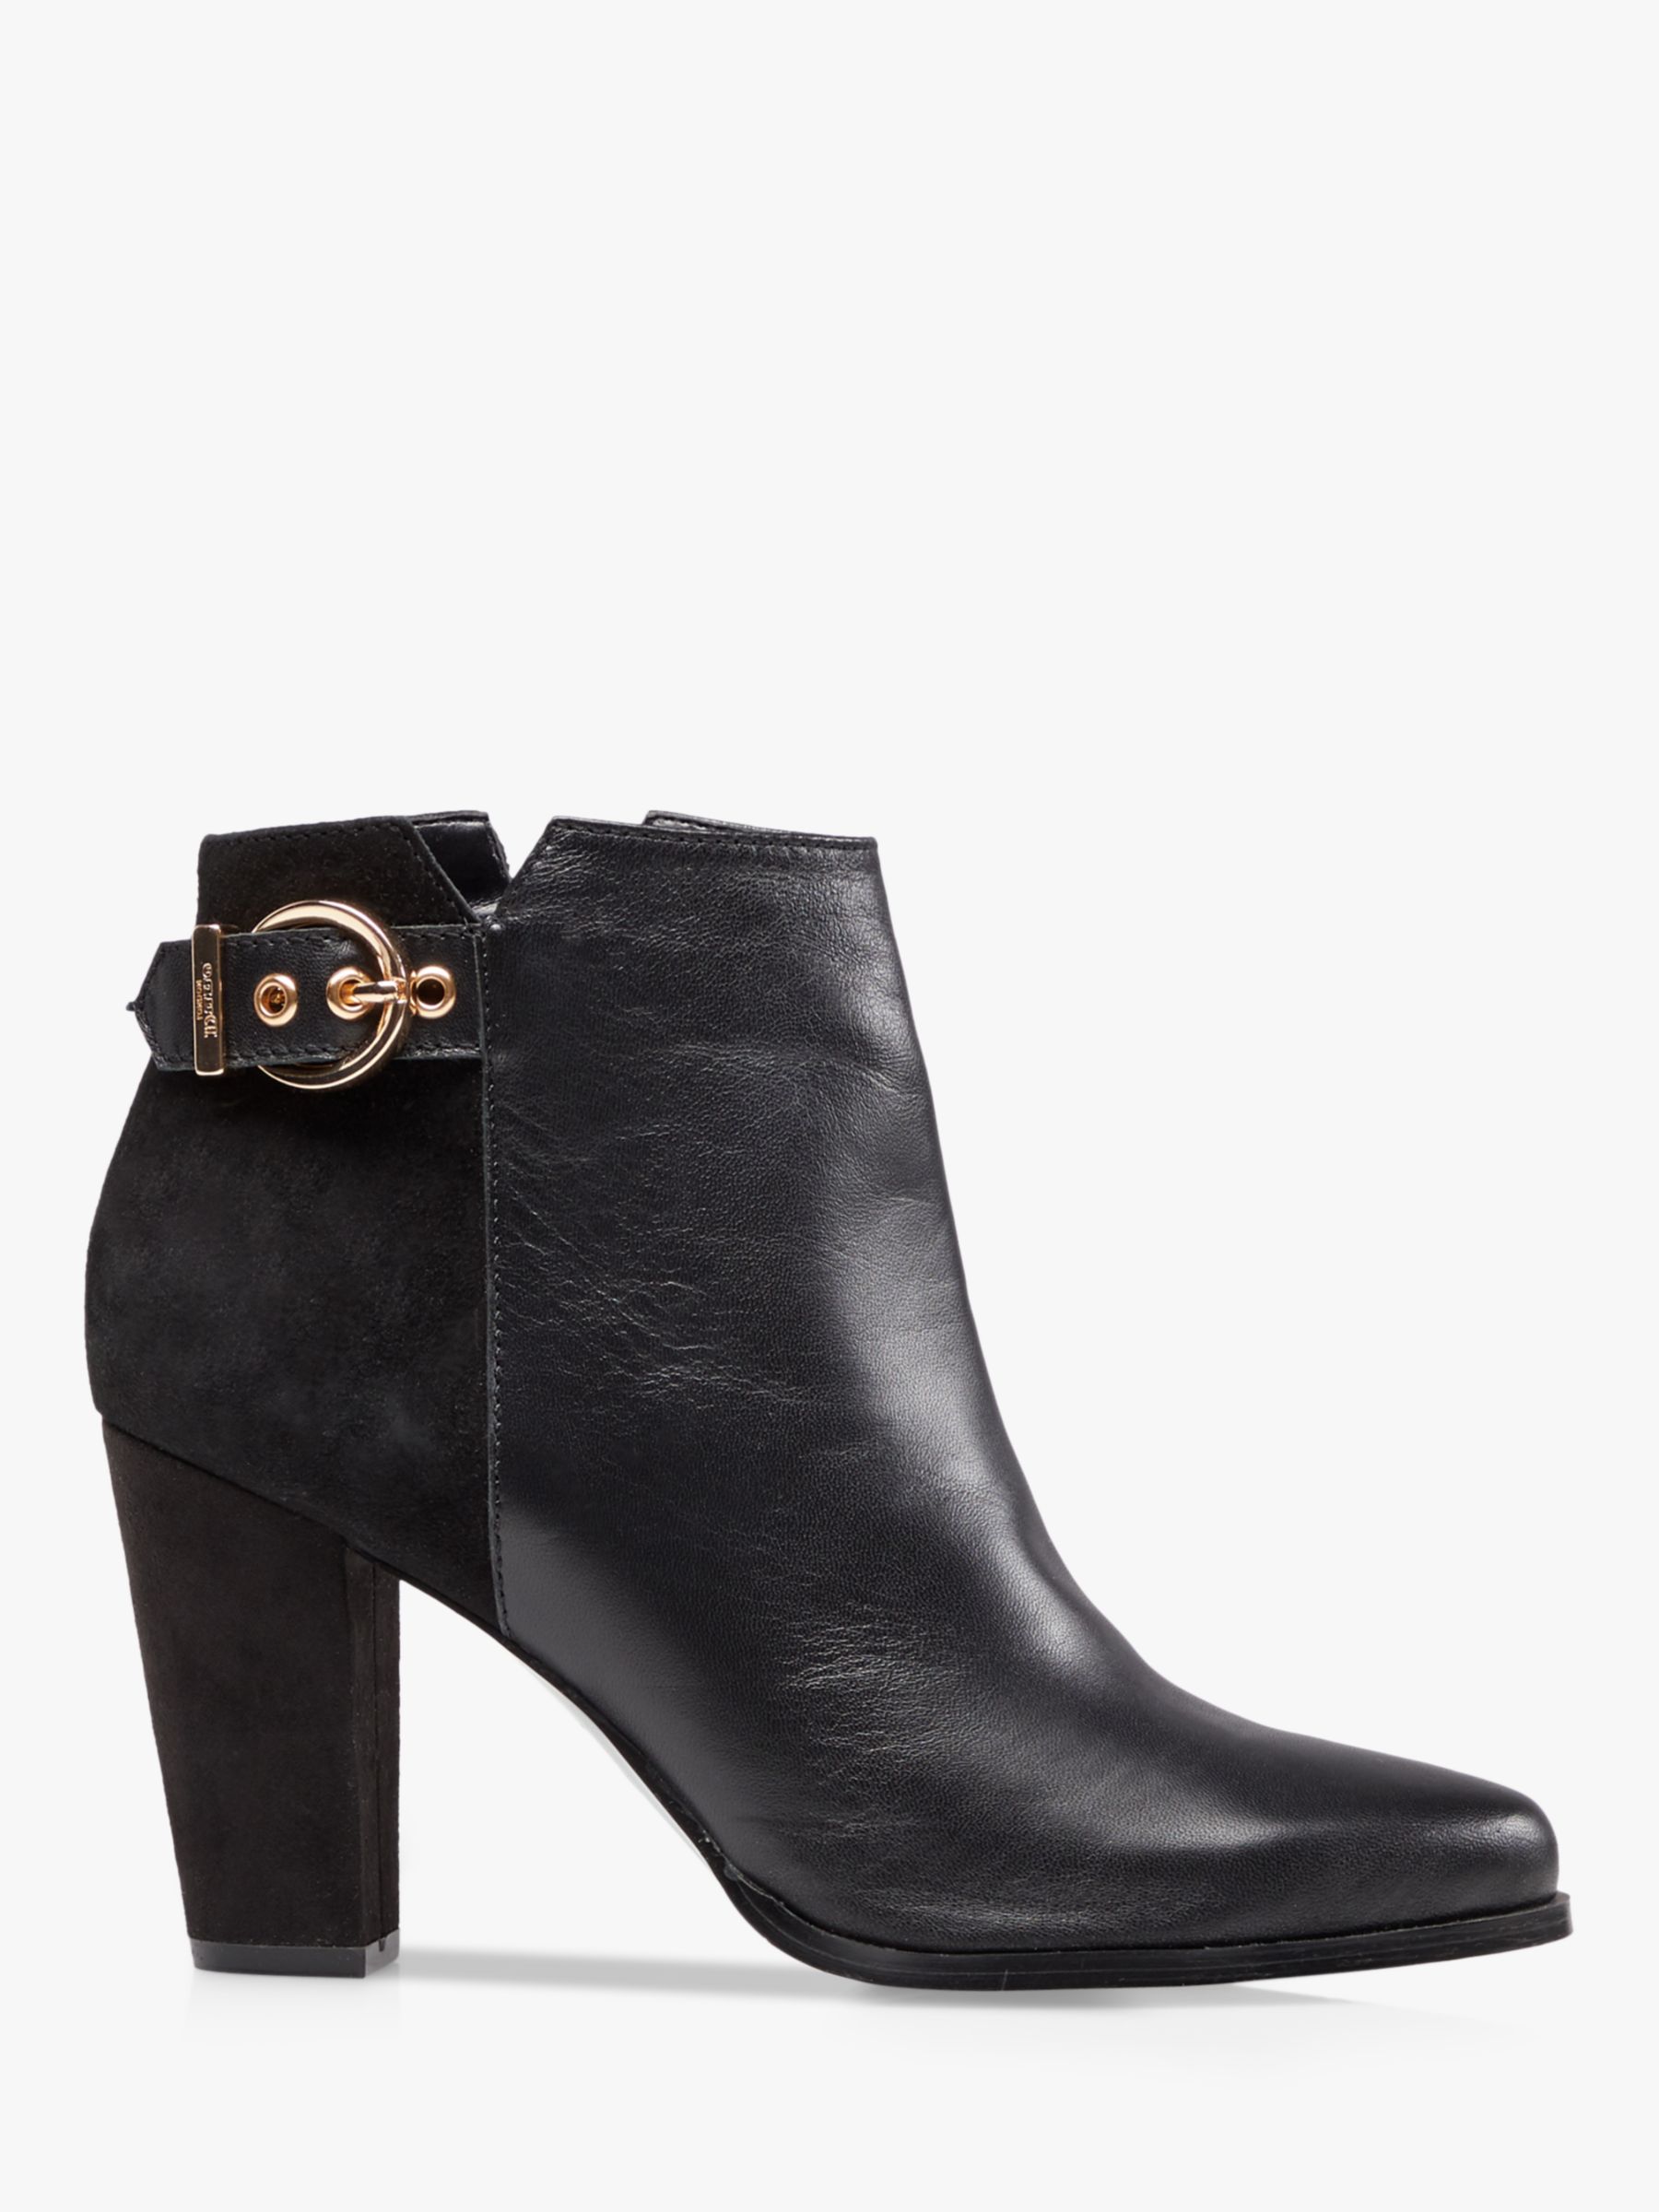 Dune Olla Leather Ankle Boots, Black